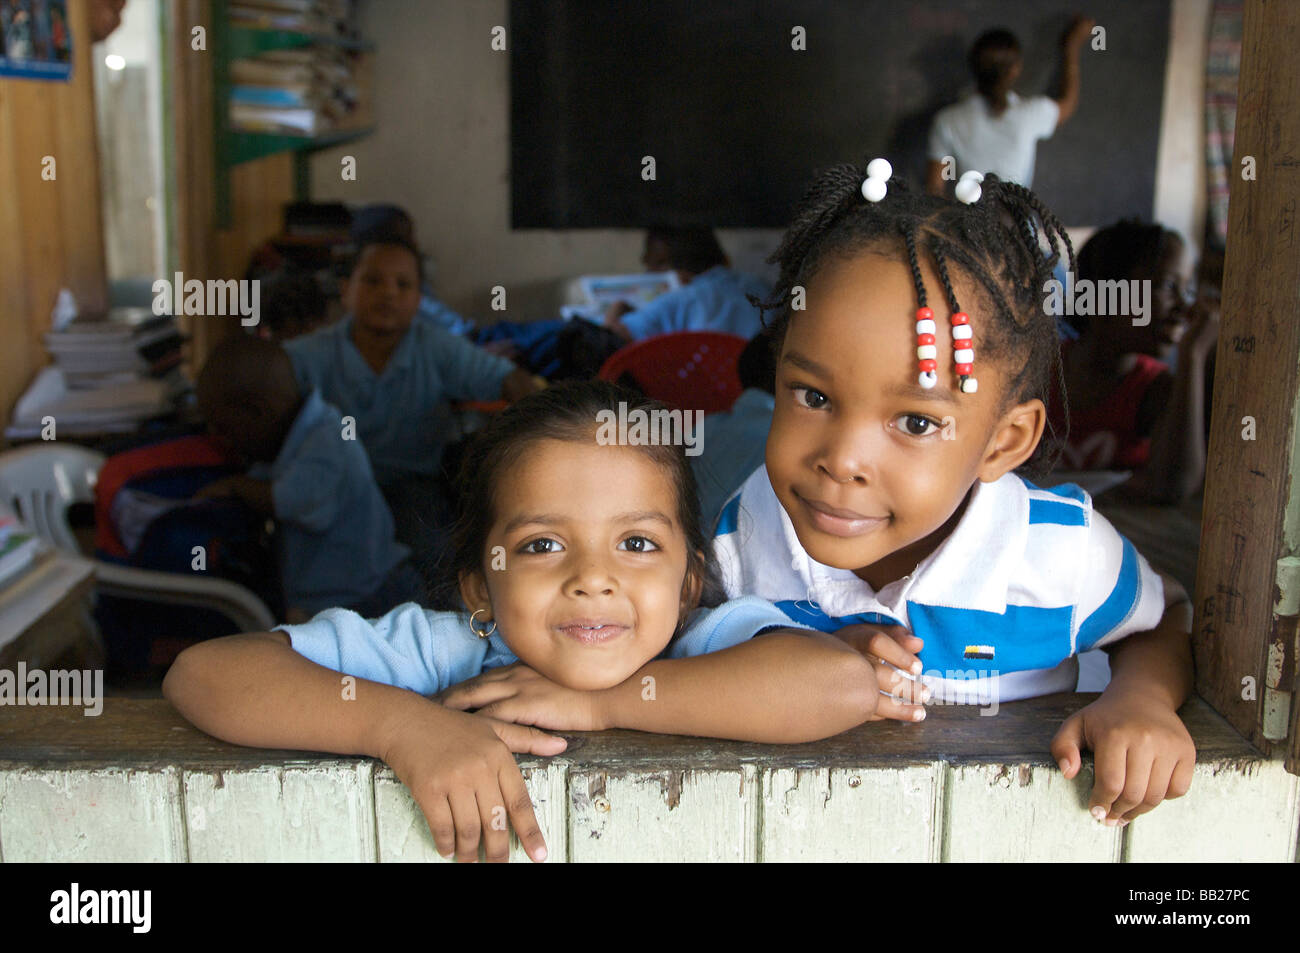 Sint Maarten Philipsburg a school for children of illegal immigrants tucked away in a dirty alley Stock Photo